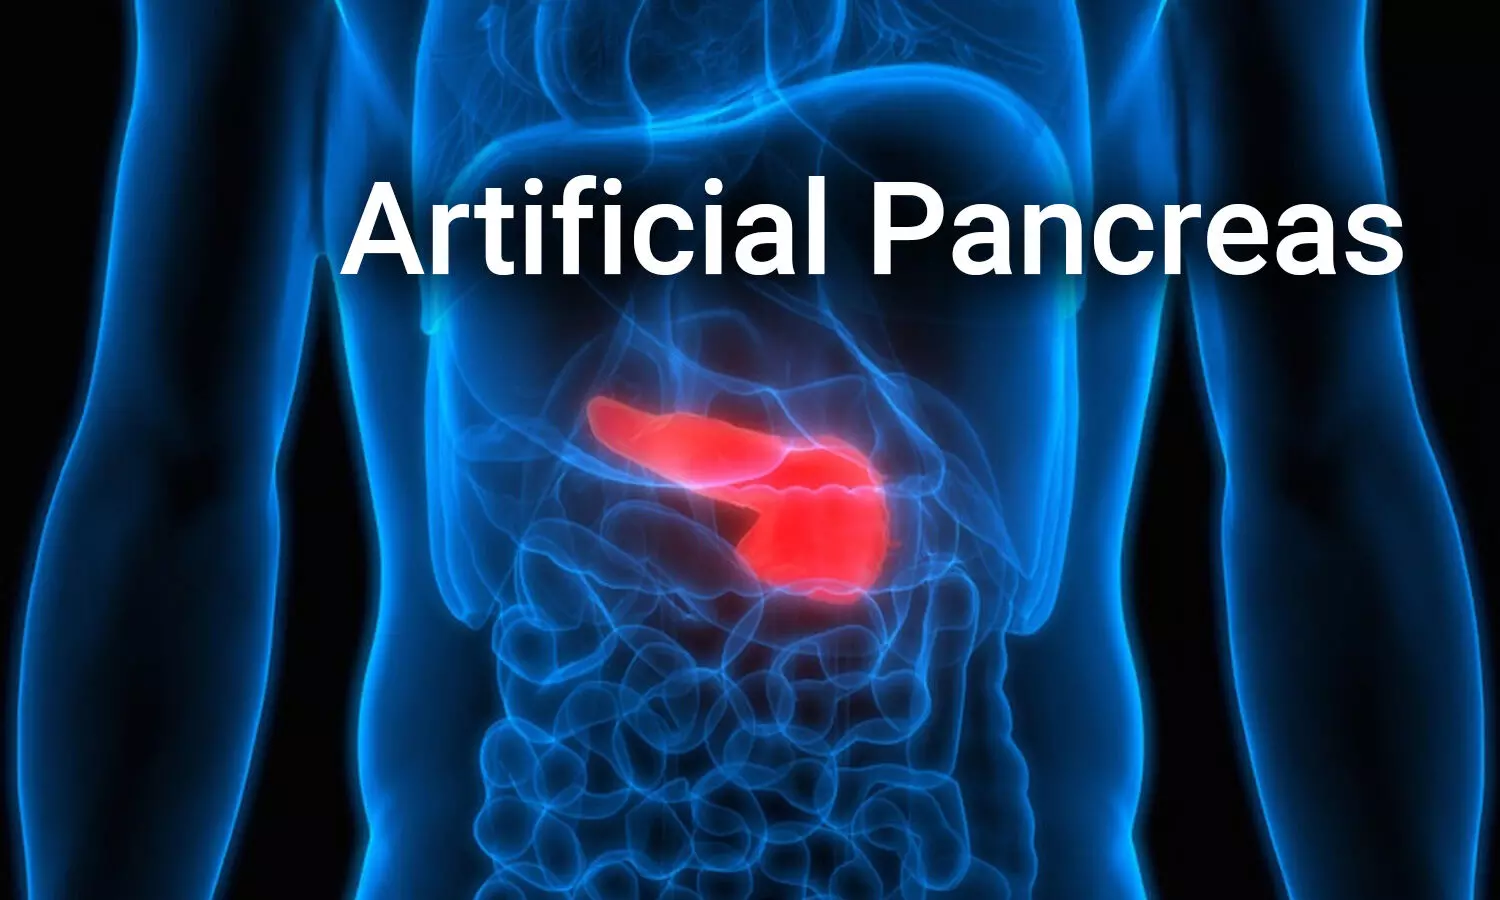 Artificial pancreas can prevent dangerously low blood sugar in people with T1D